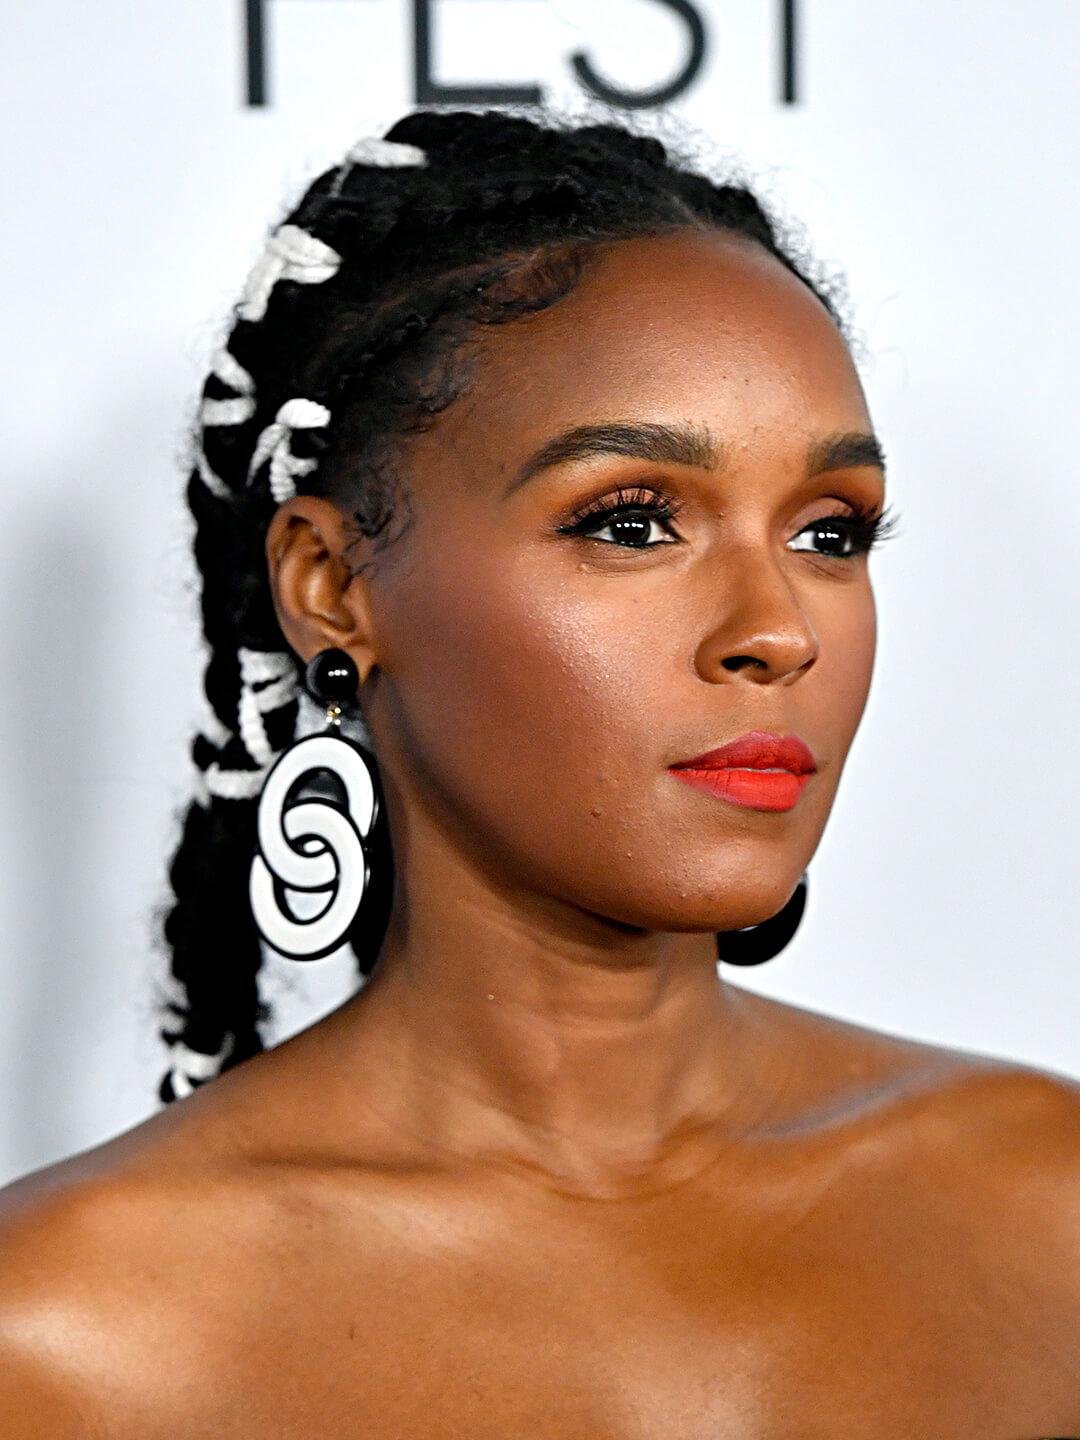 Janelle Monae rocking a threaded braids hairstyle and bold black and white circle earrings